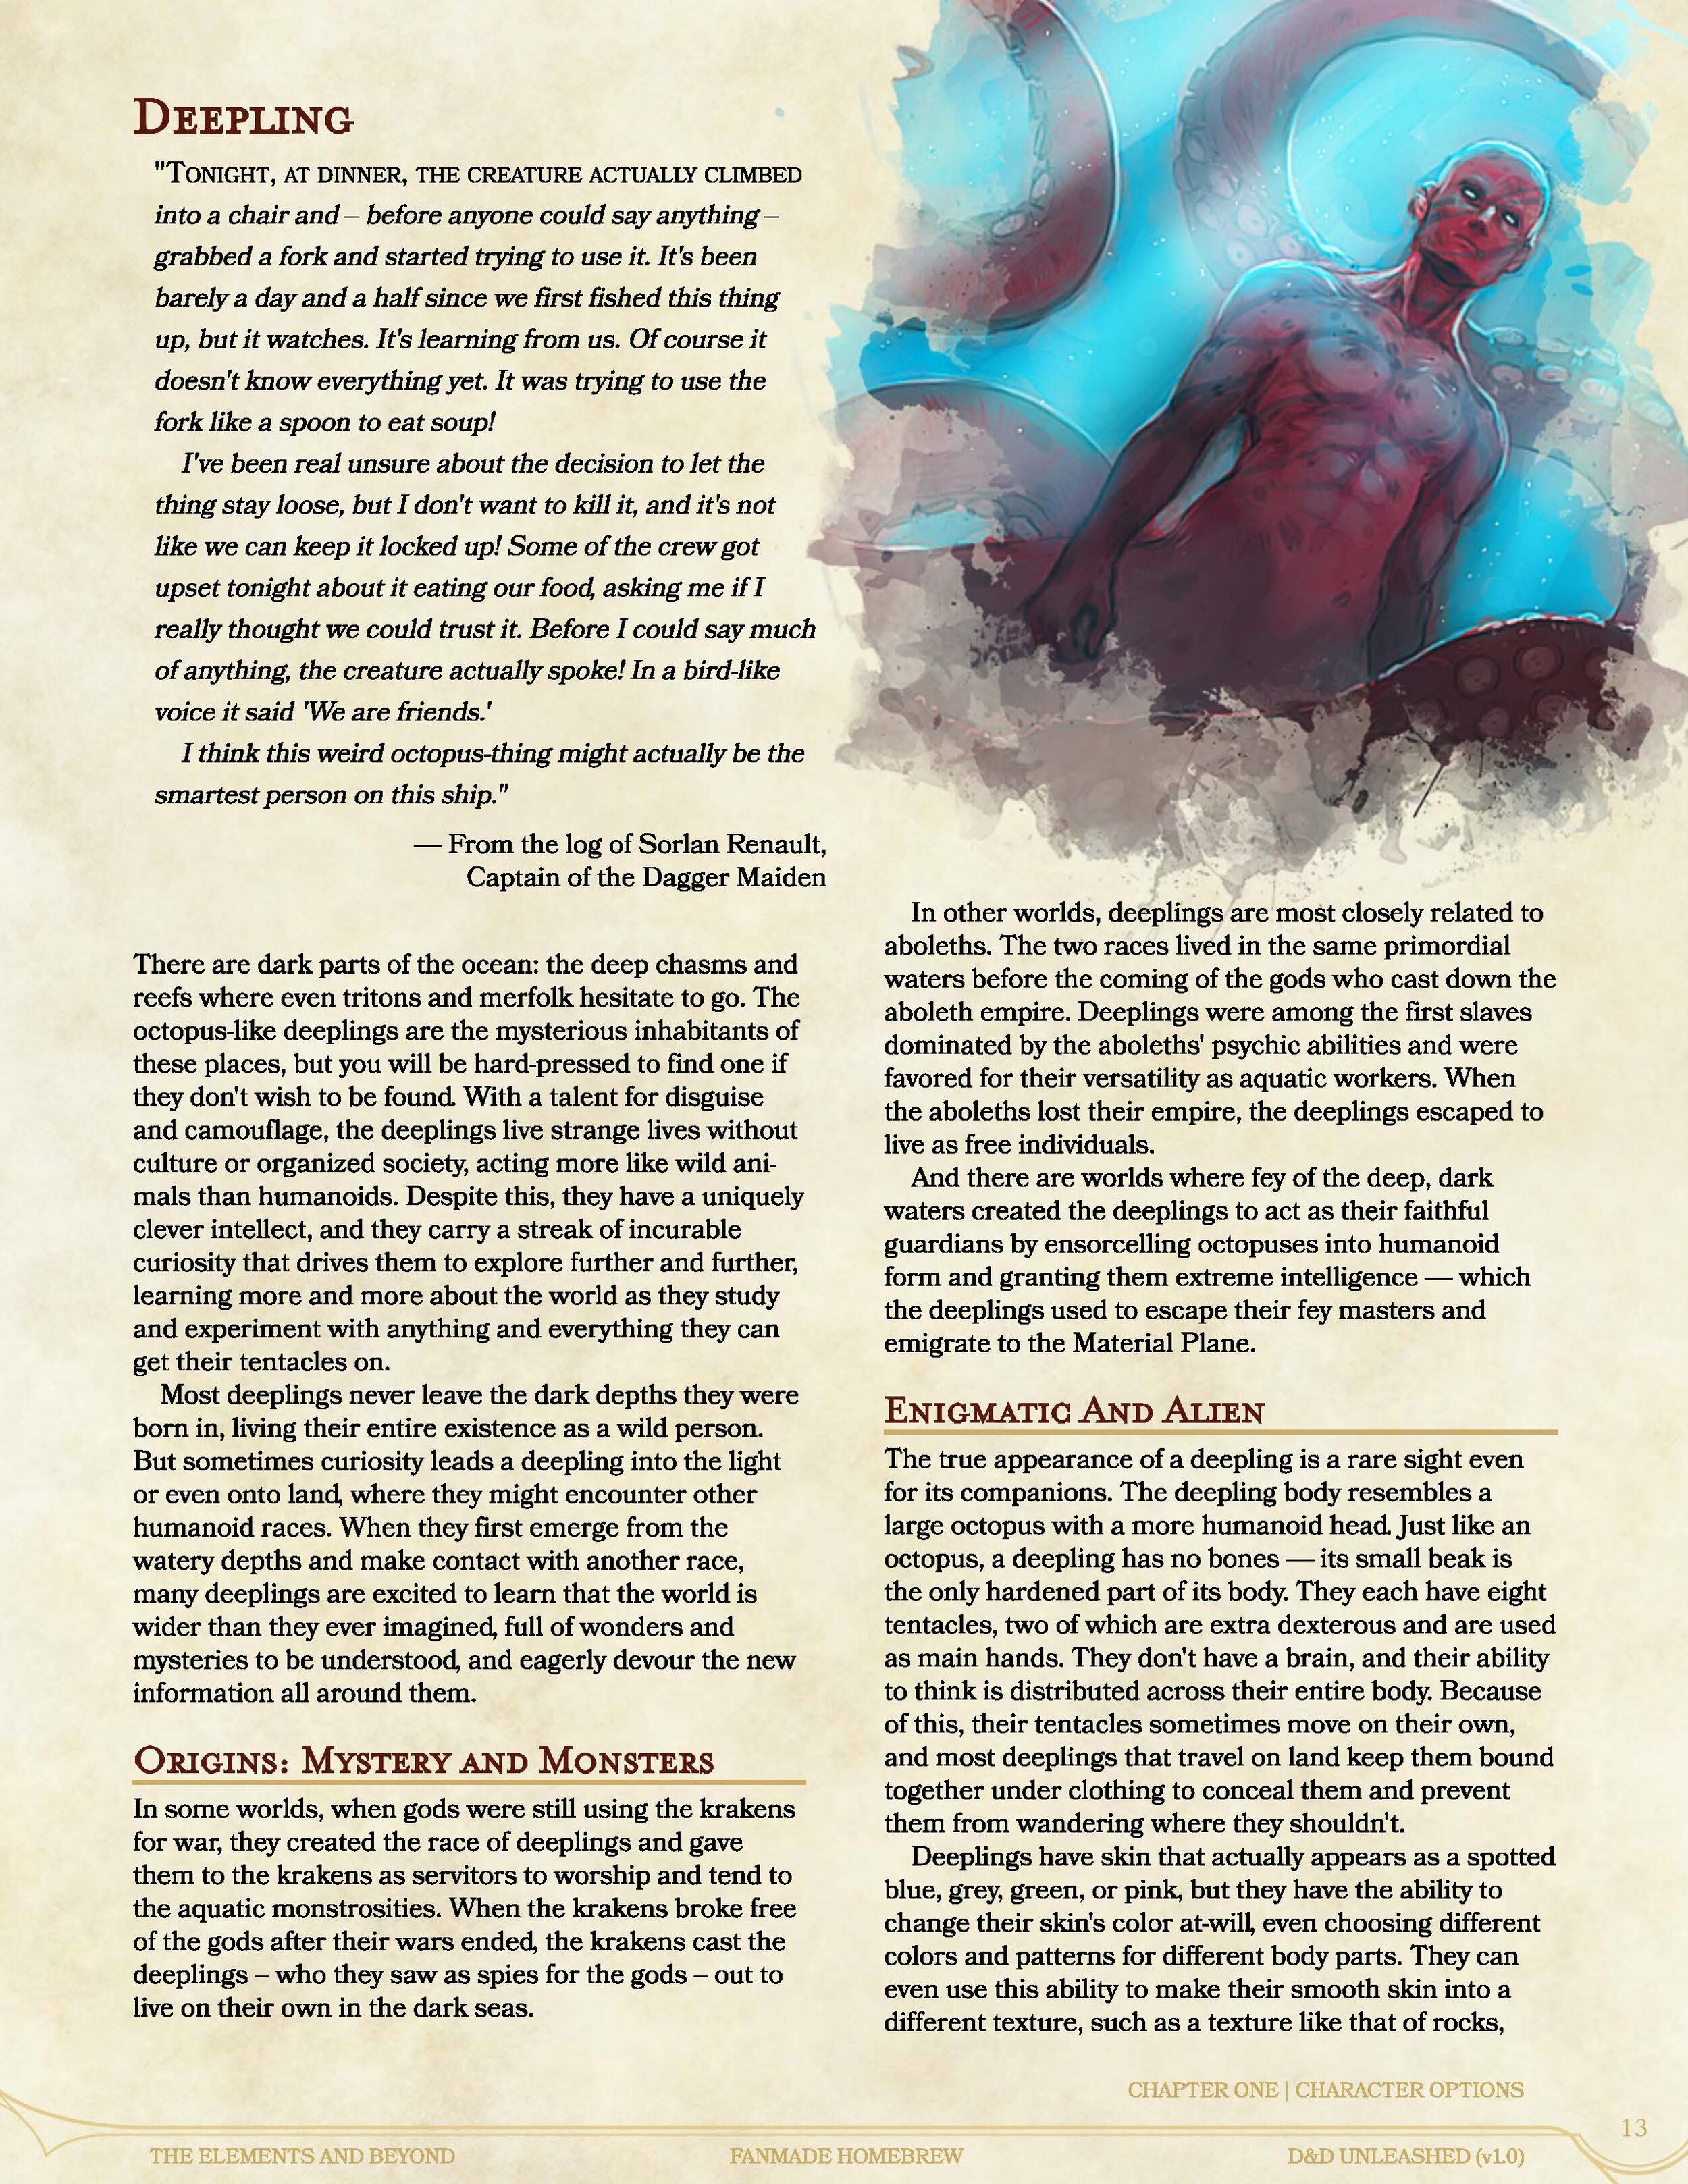 D&D Unleashed Compendium -- The Elements and Beyond (v1p0)_Page_013.jpg